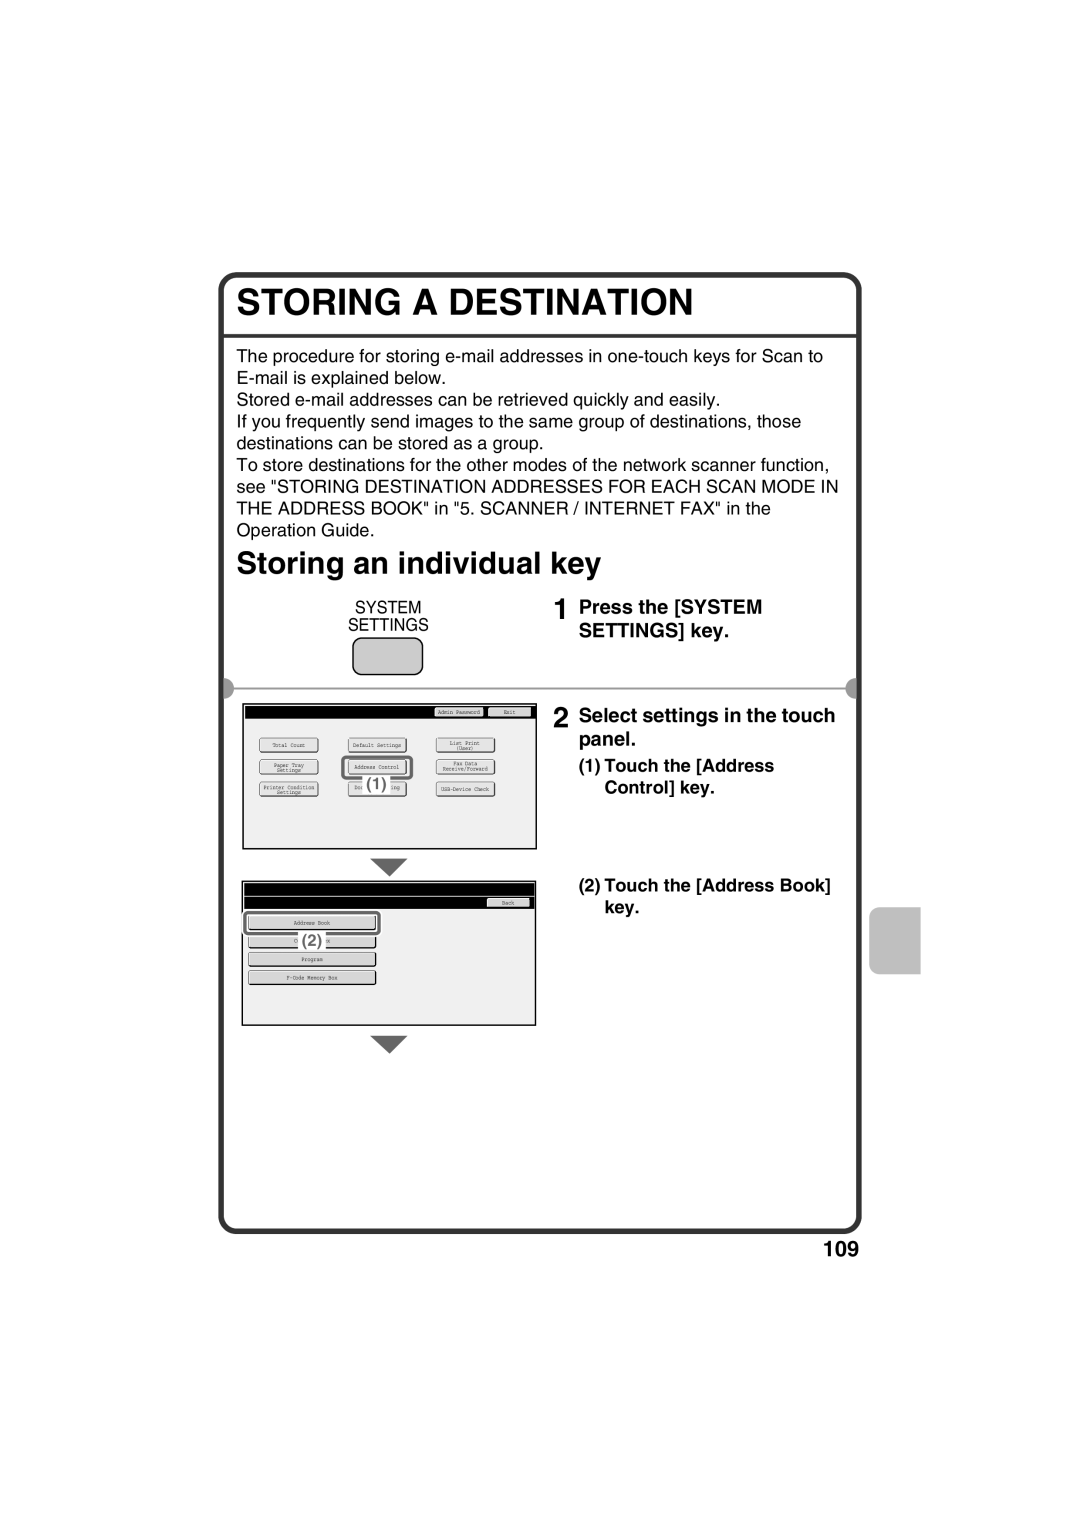 Sharp MX-C381, MX-C311 Storing A Destination, Storing an individual key, SETTINGS key, Select settings in the touch panel 